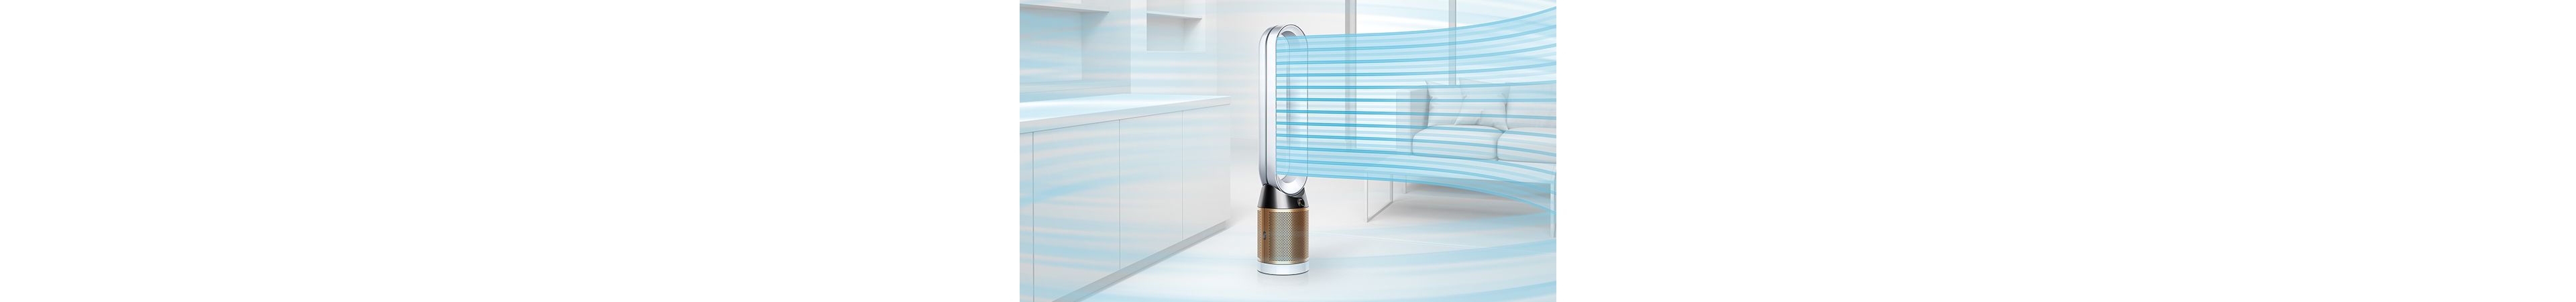 A Dyson Pure Cryptomic purifier projecting air throughout the room